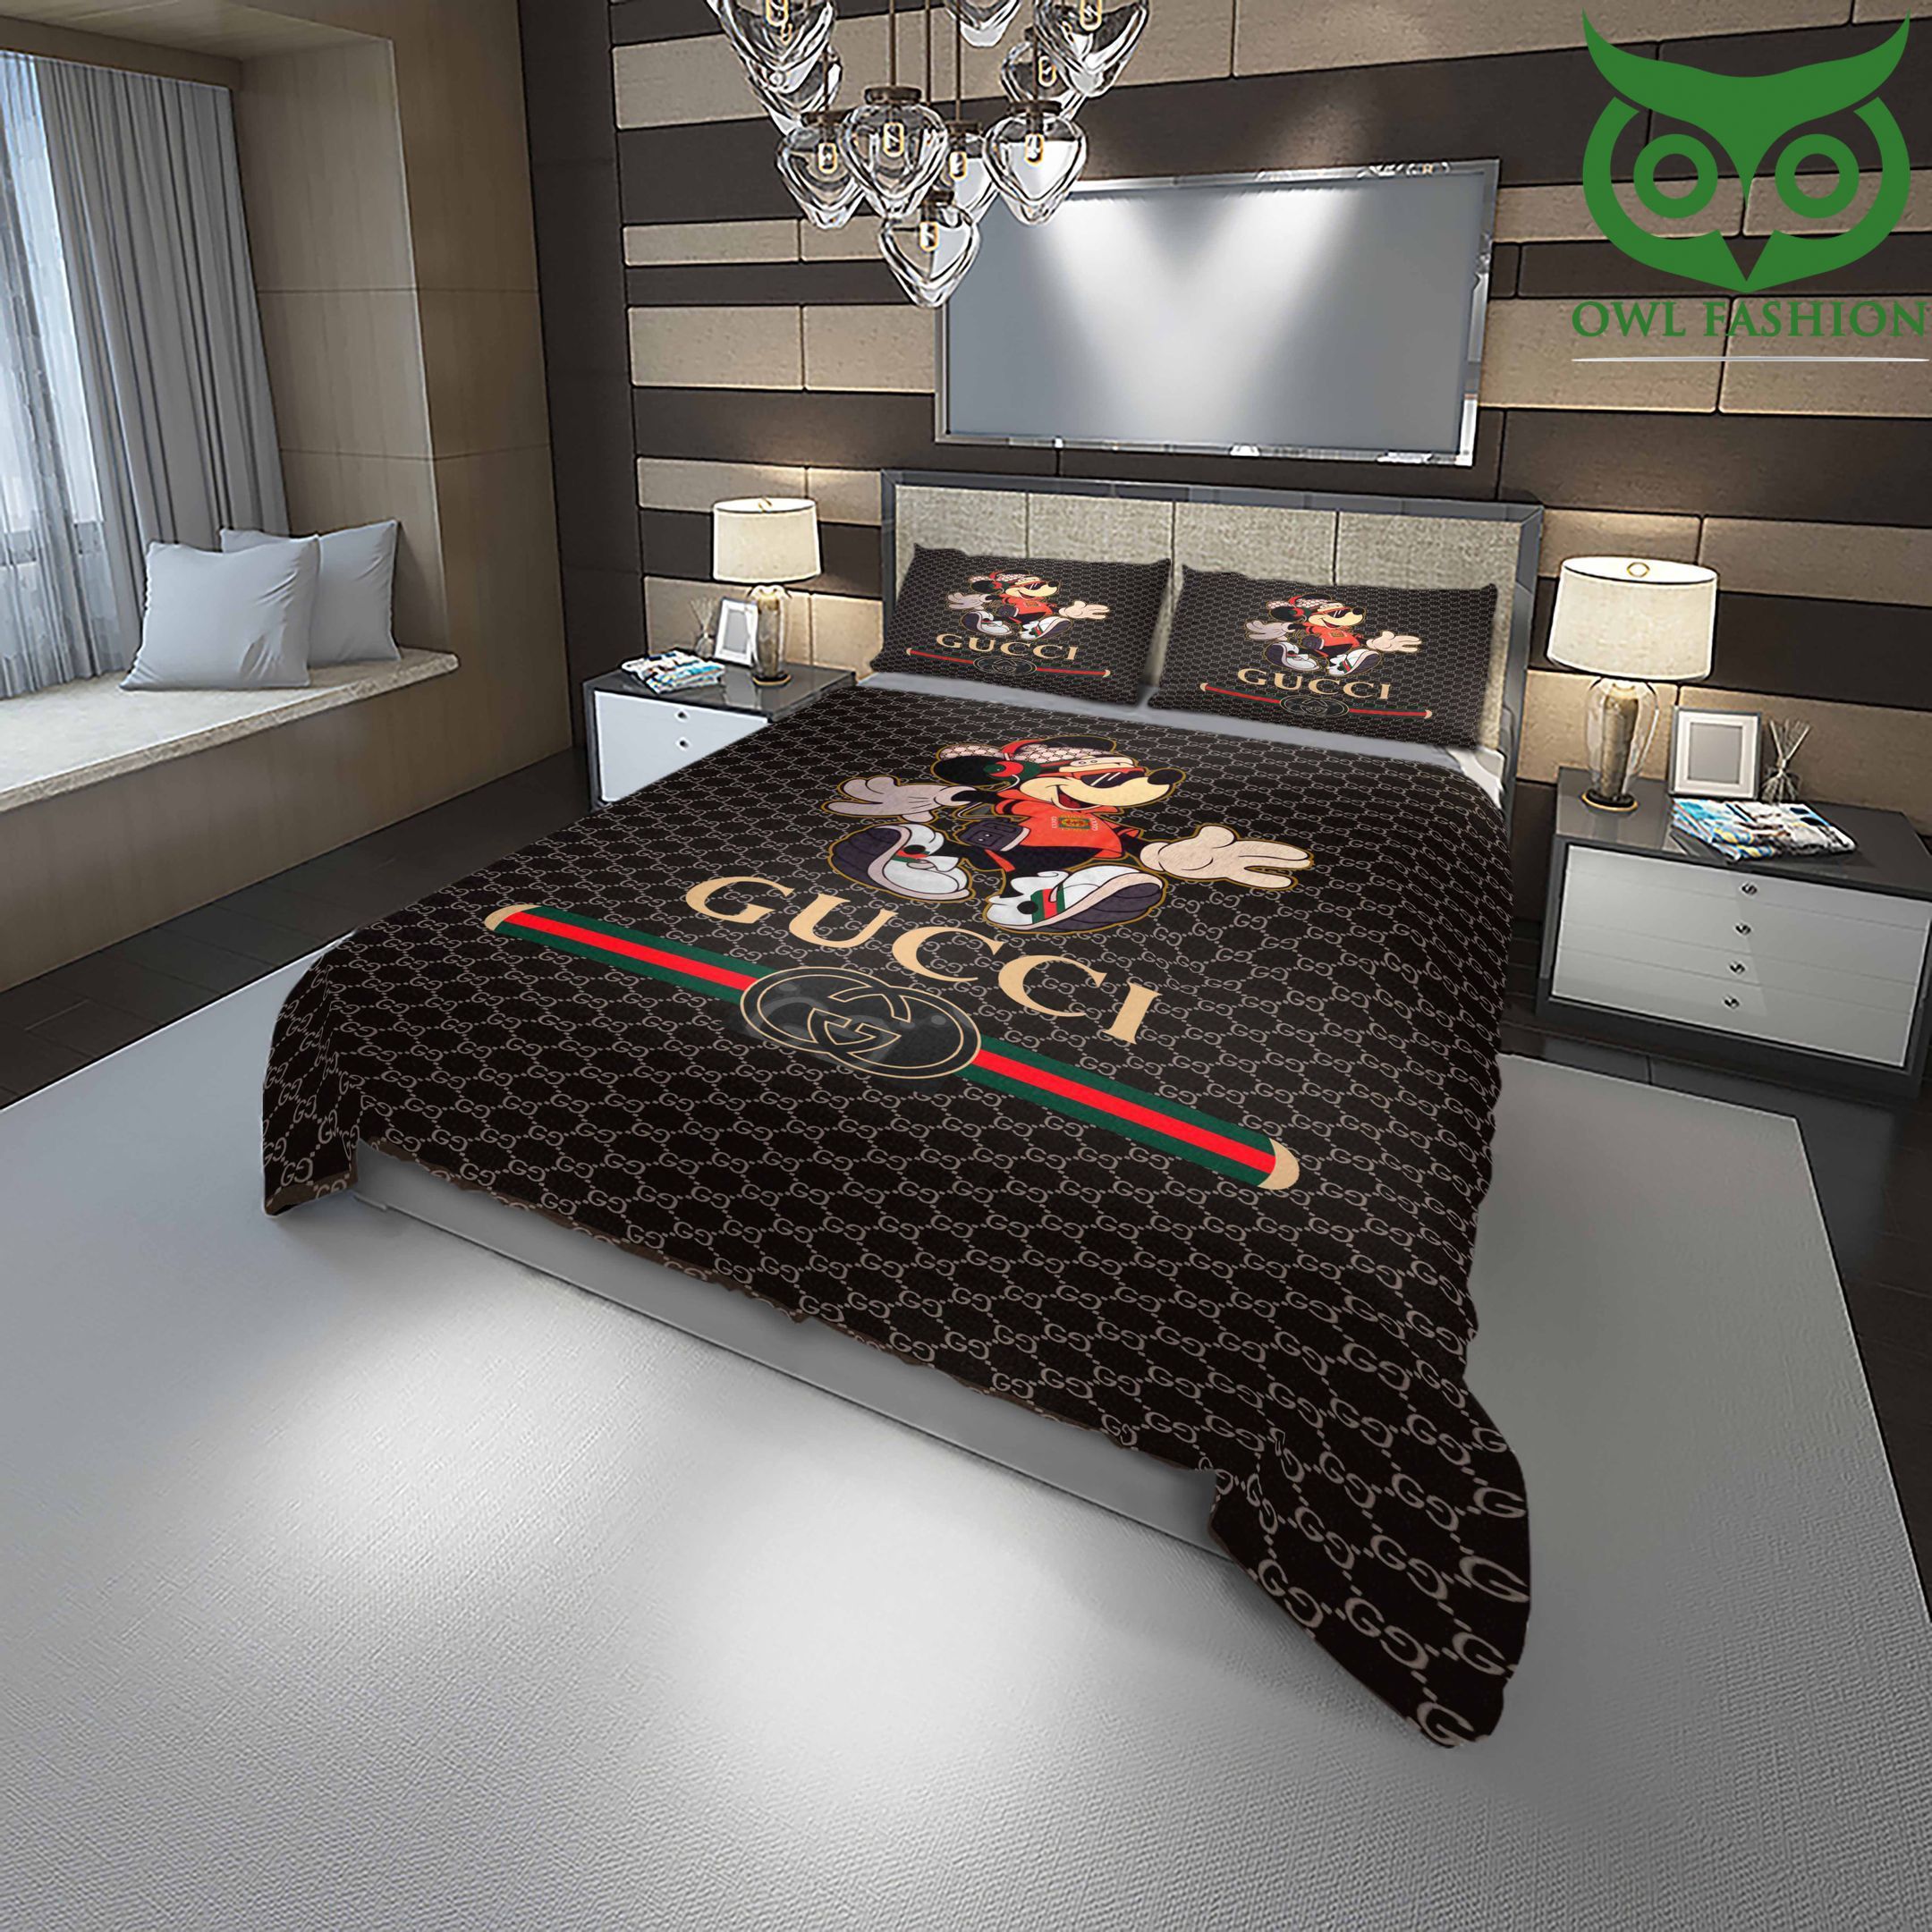 31 LIMITED EDITION Gucci Mickey Mouse black bedding set